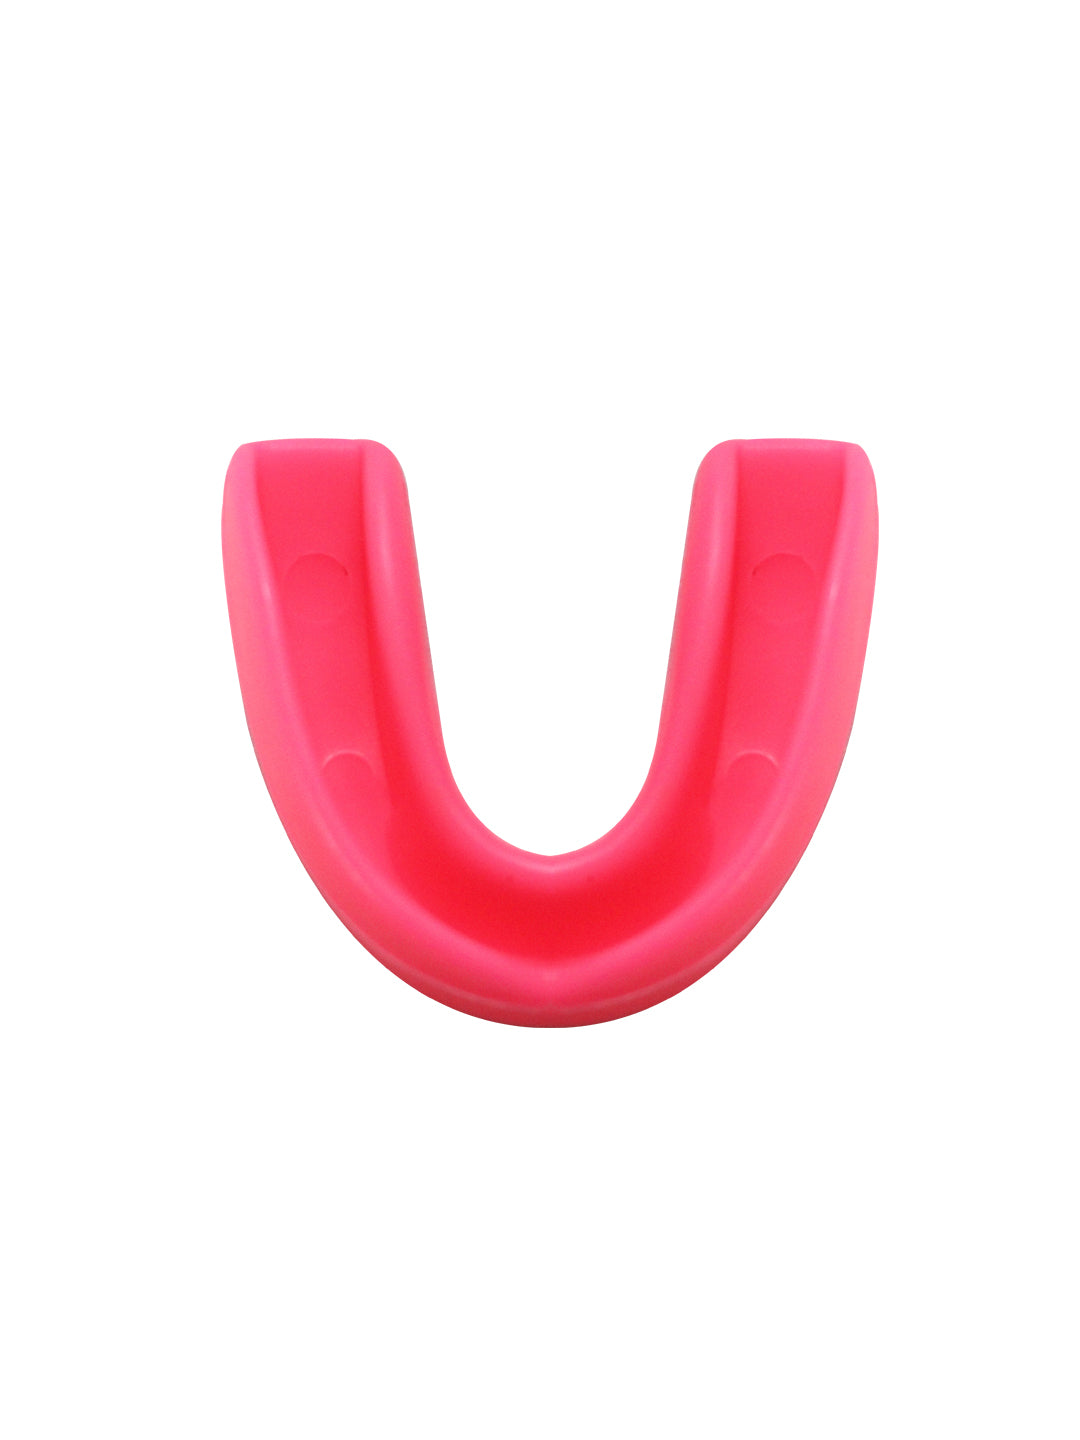 Invincible Classic Style Mouth Guards